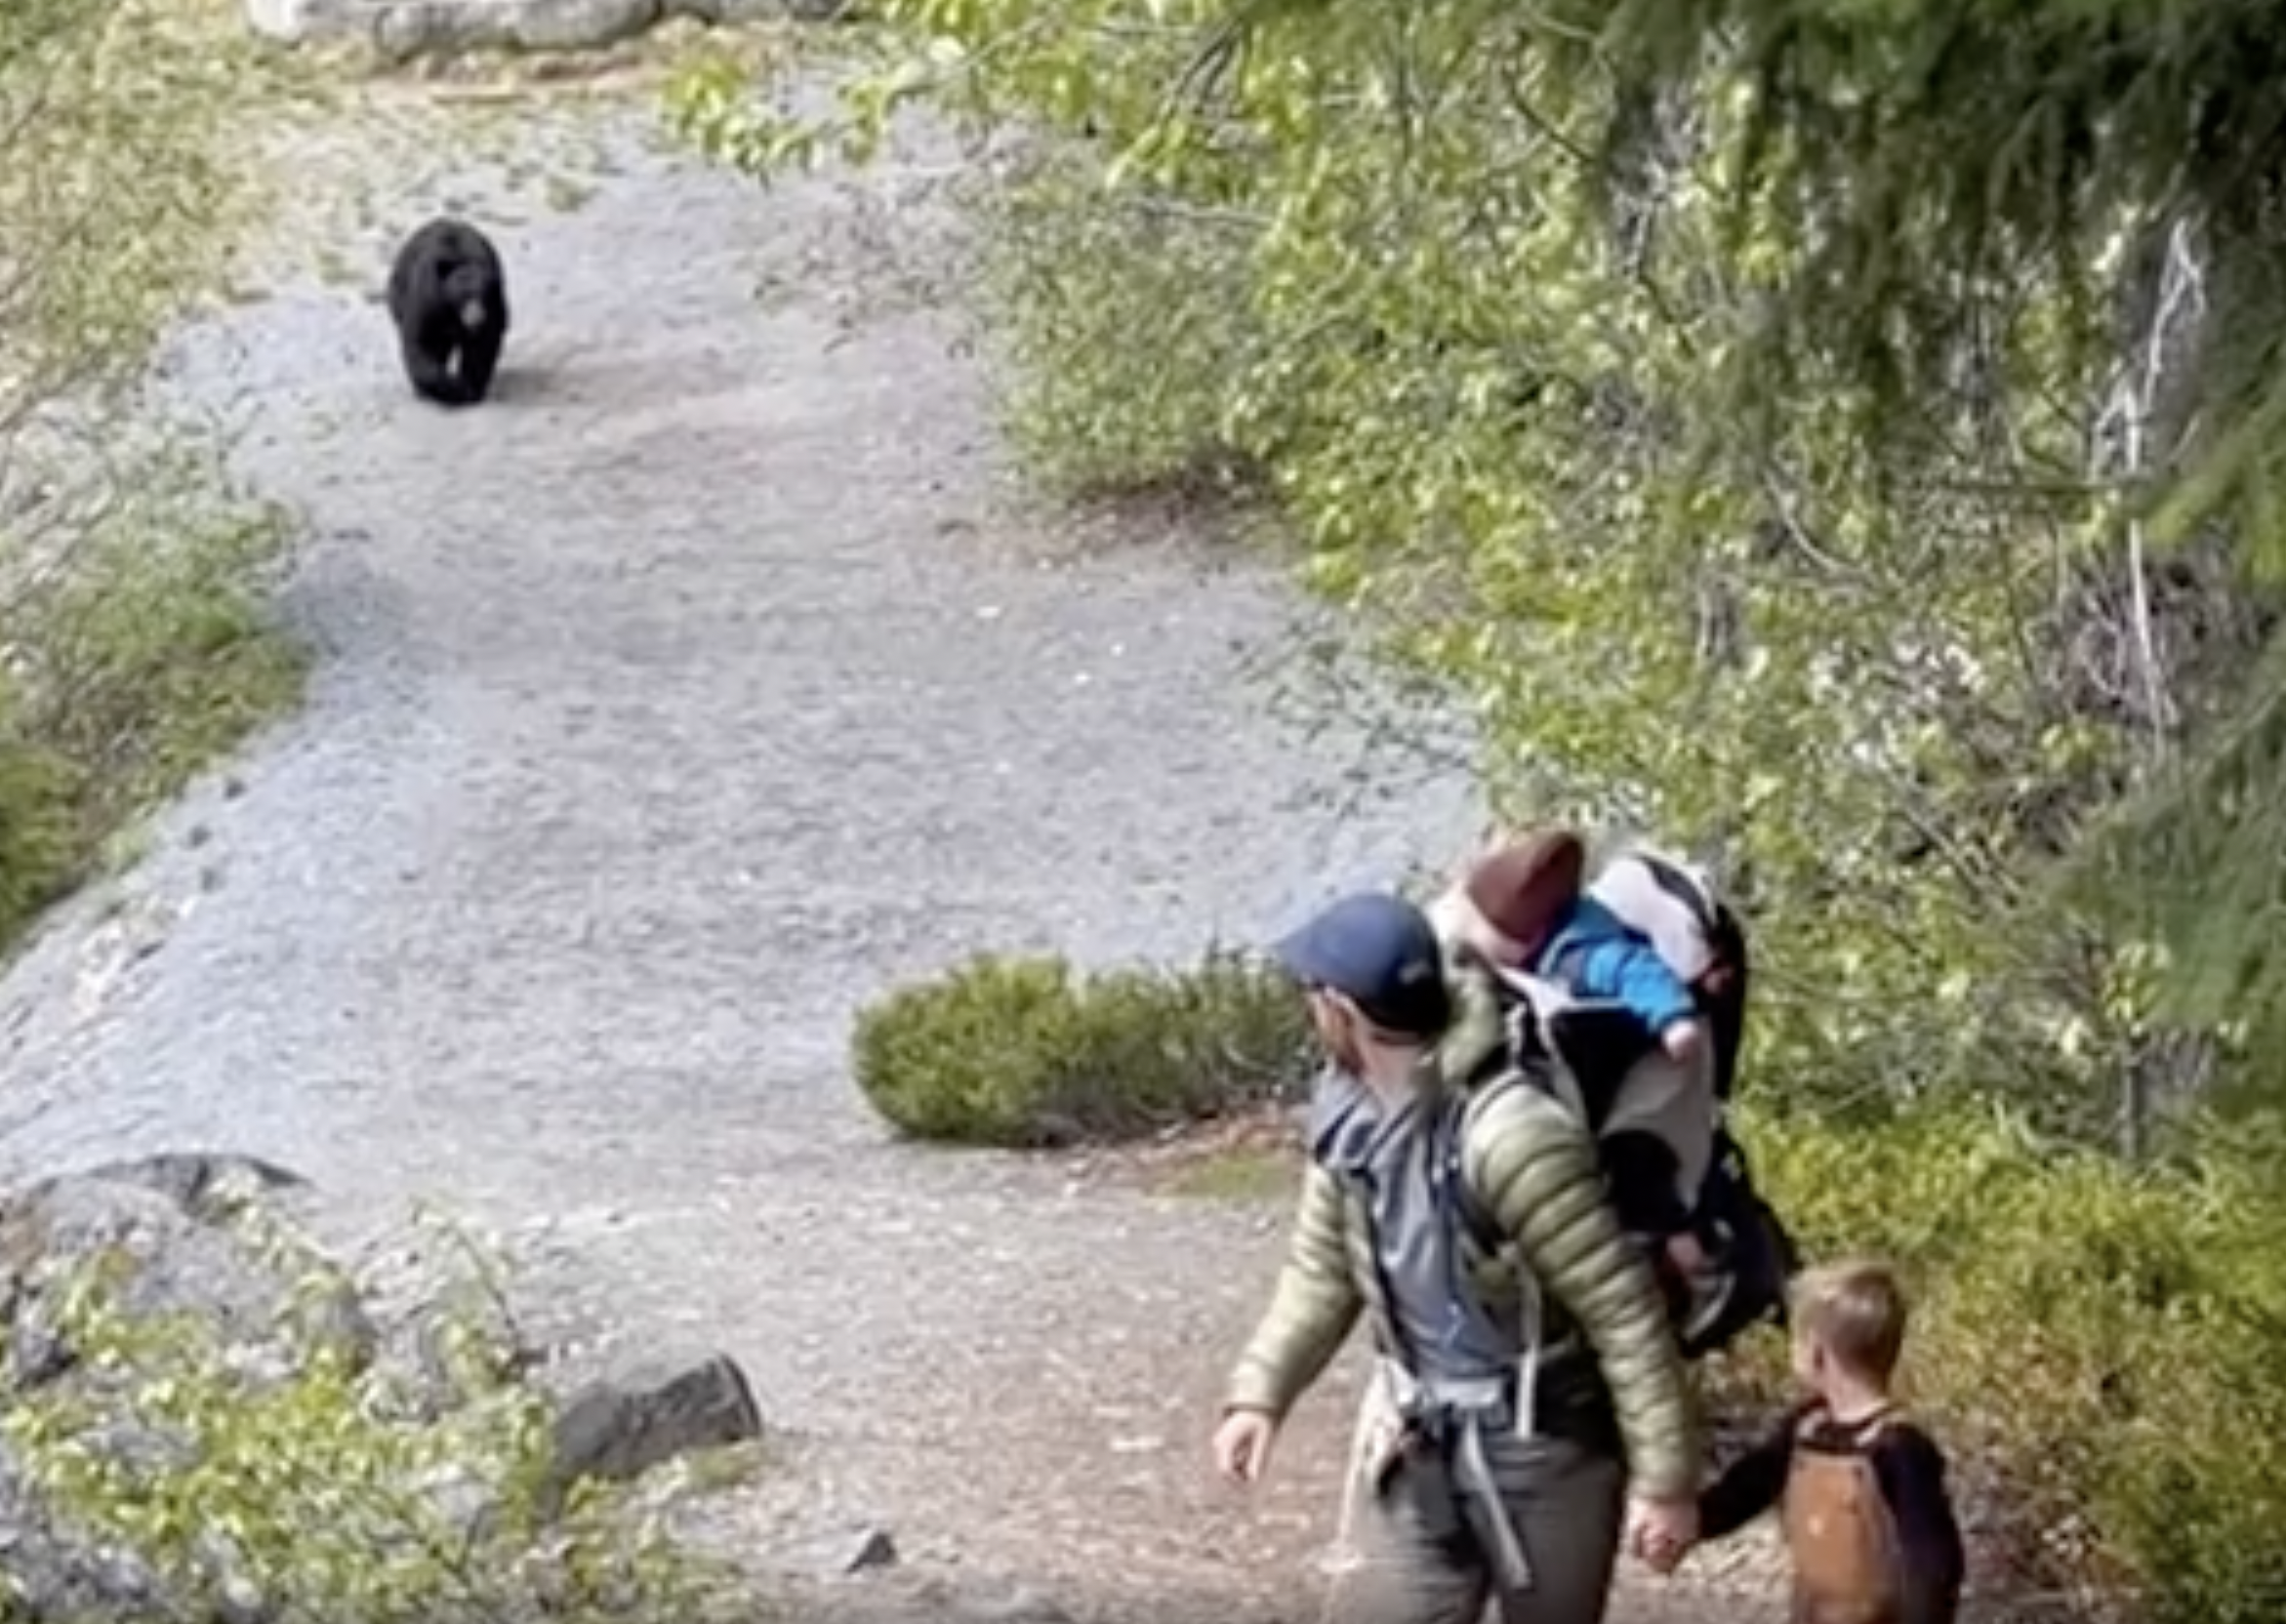 72-year-old man attacked by bear along trail, officials say